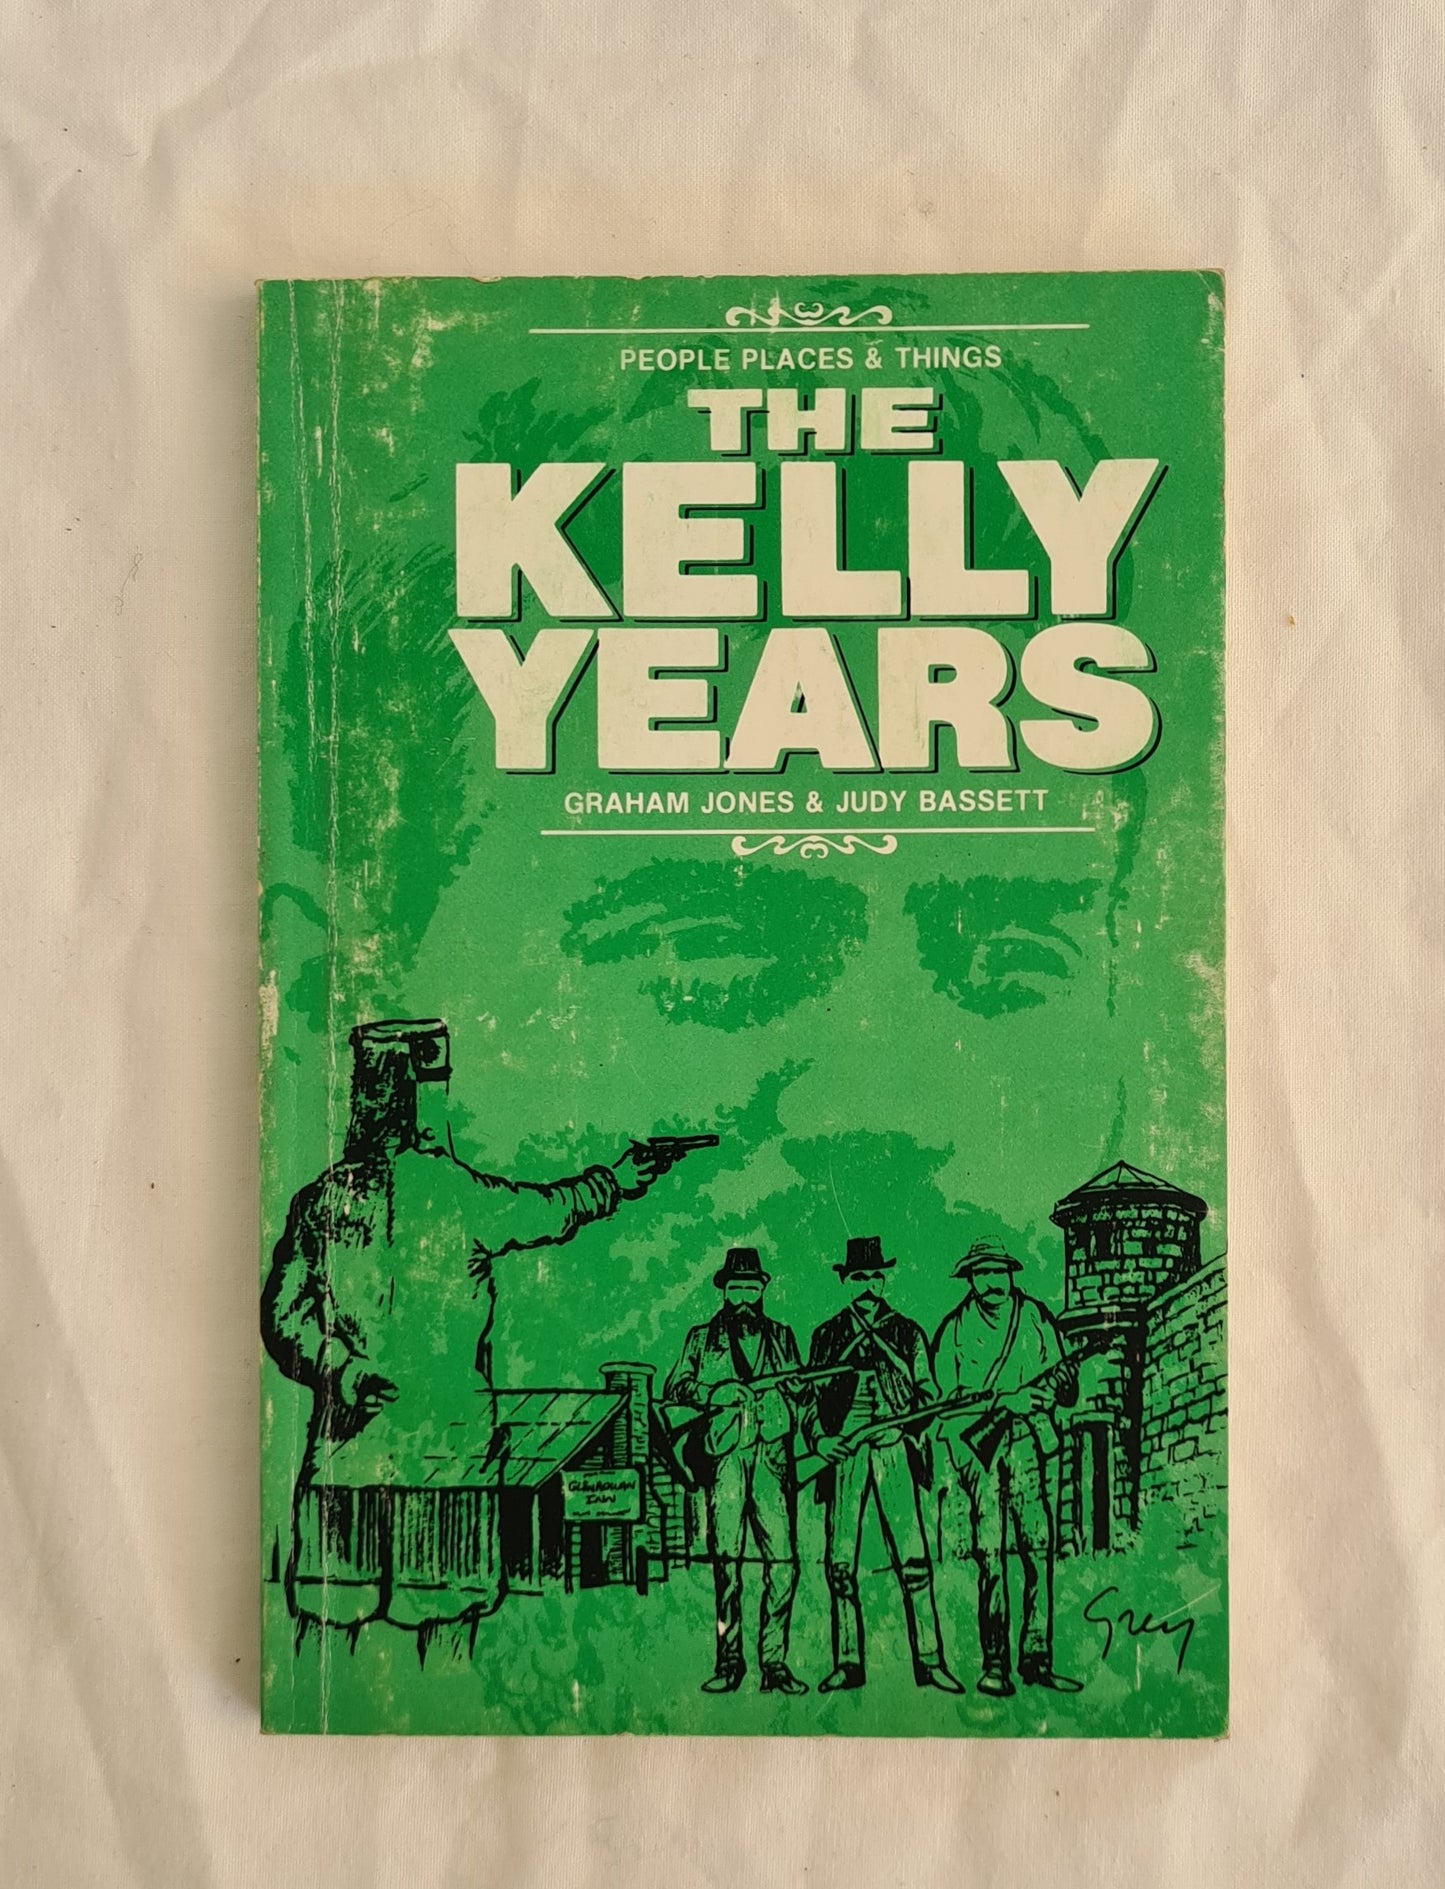 The Kelly Years  People Places and Things  by Graham Jones and Judy Bassett